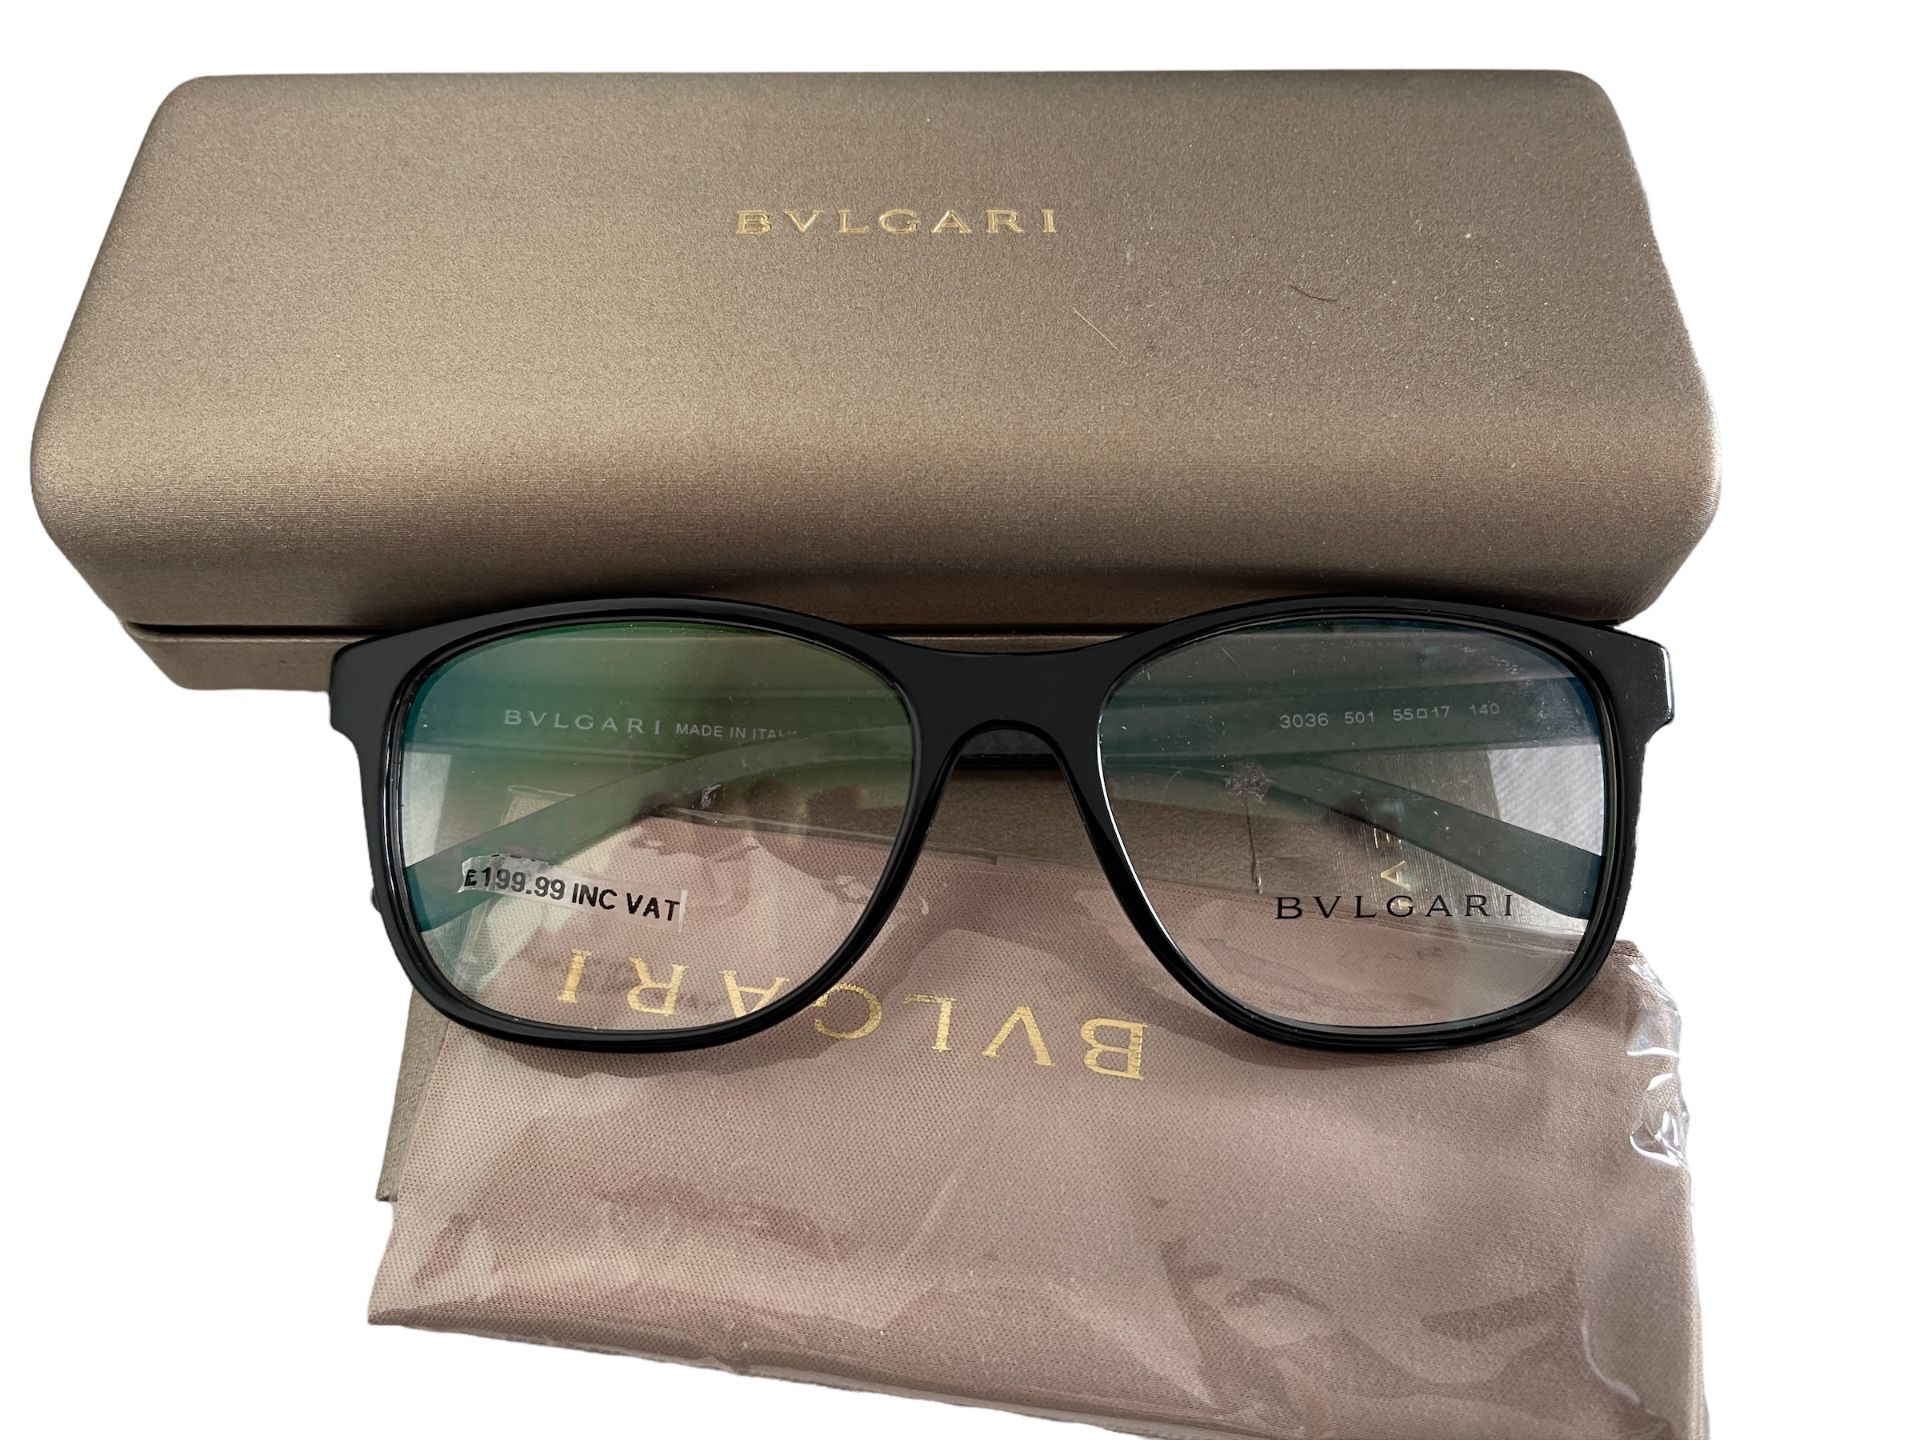 Bvlgari Gents Spectacle Frames with Original Case Surplus Stock or Ex Demo - Image 5 of 7